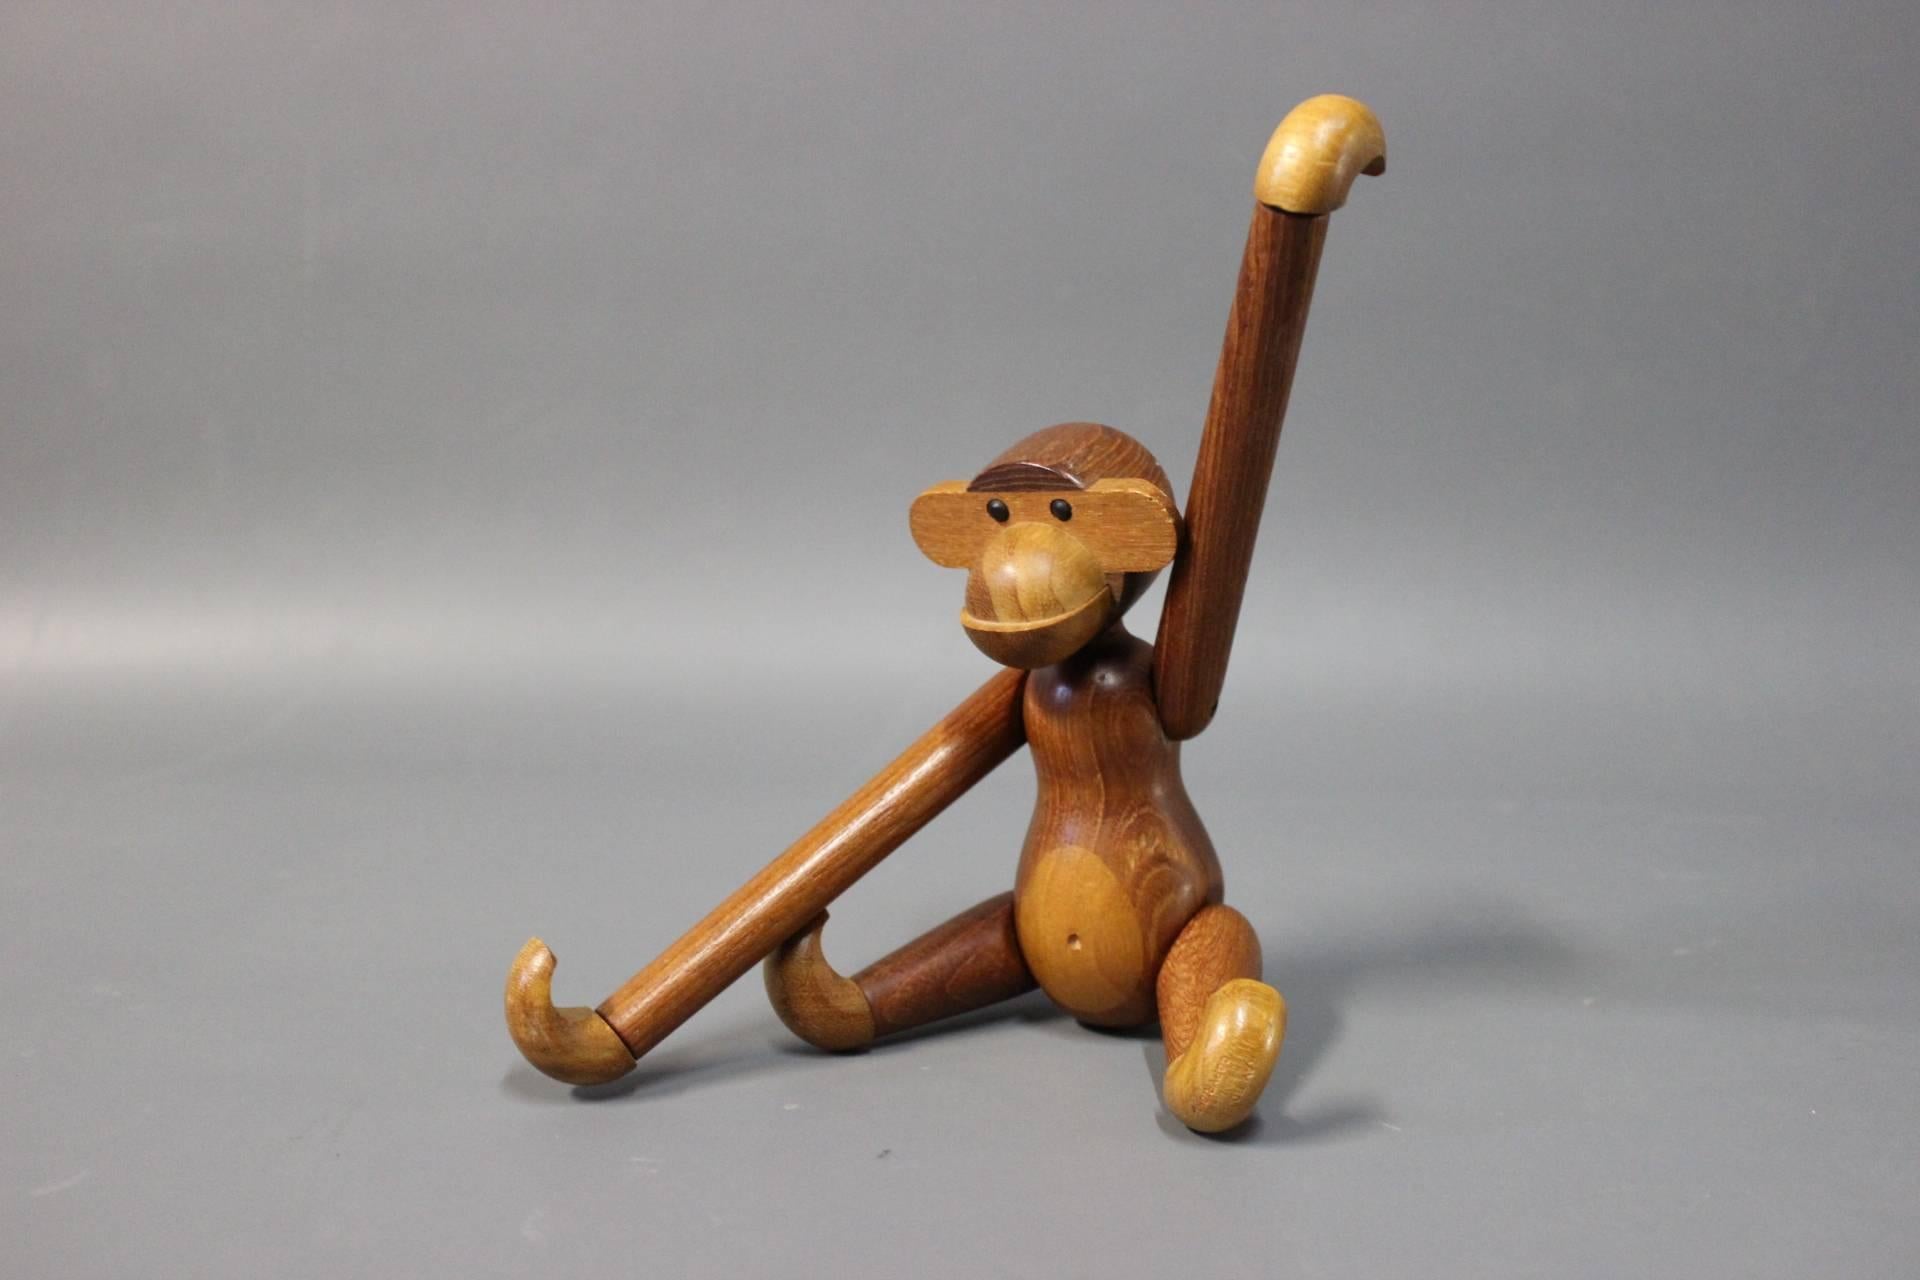 Small Wooden monkey by Kay Bojesen in teak and Limba. This collectable was first designed in 1951 and this particular monkey is from 1953. The item is of Danish design. 